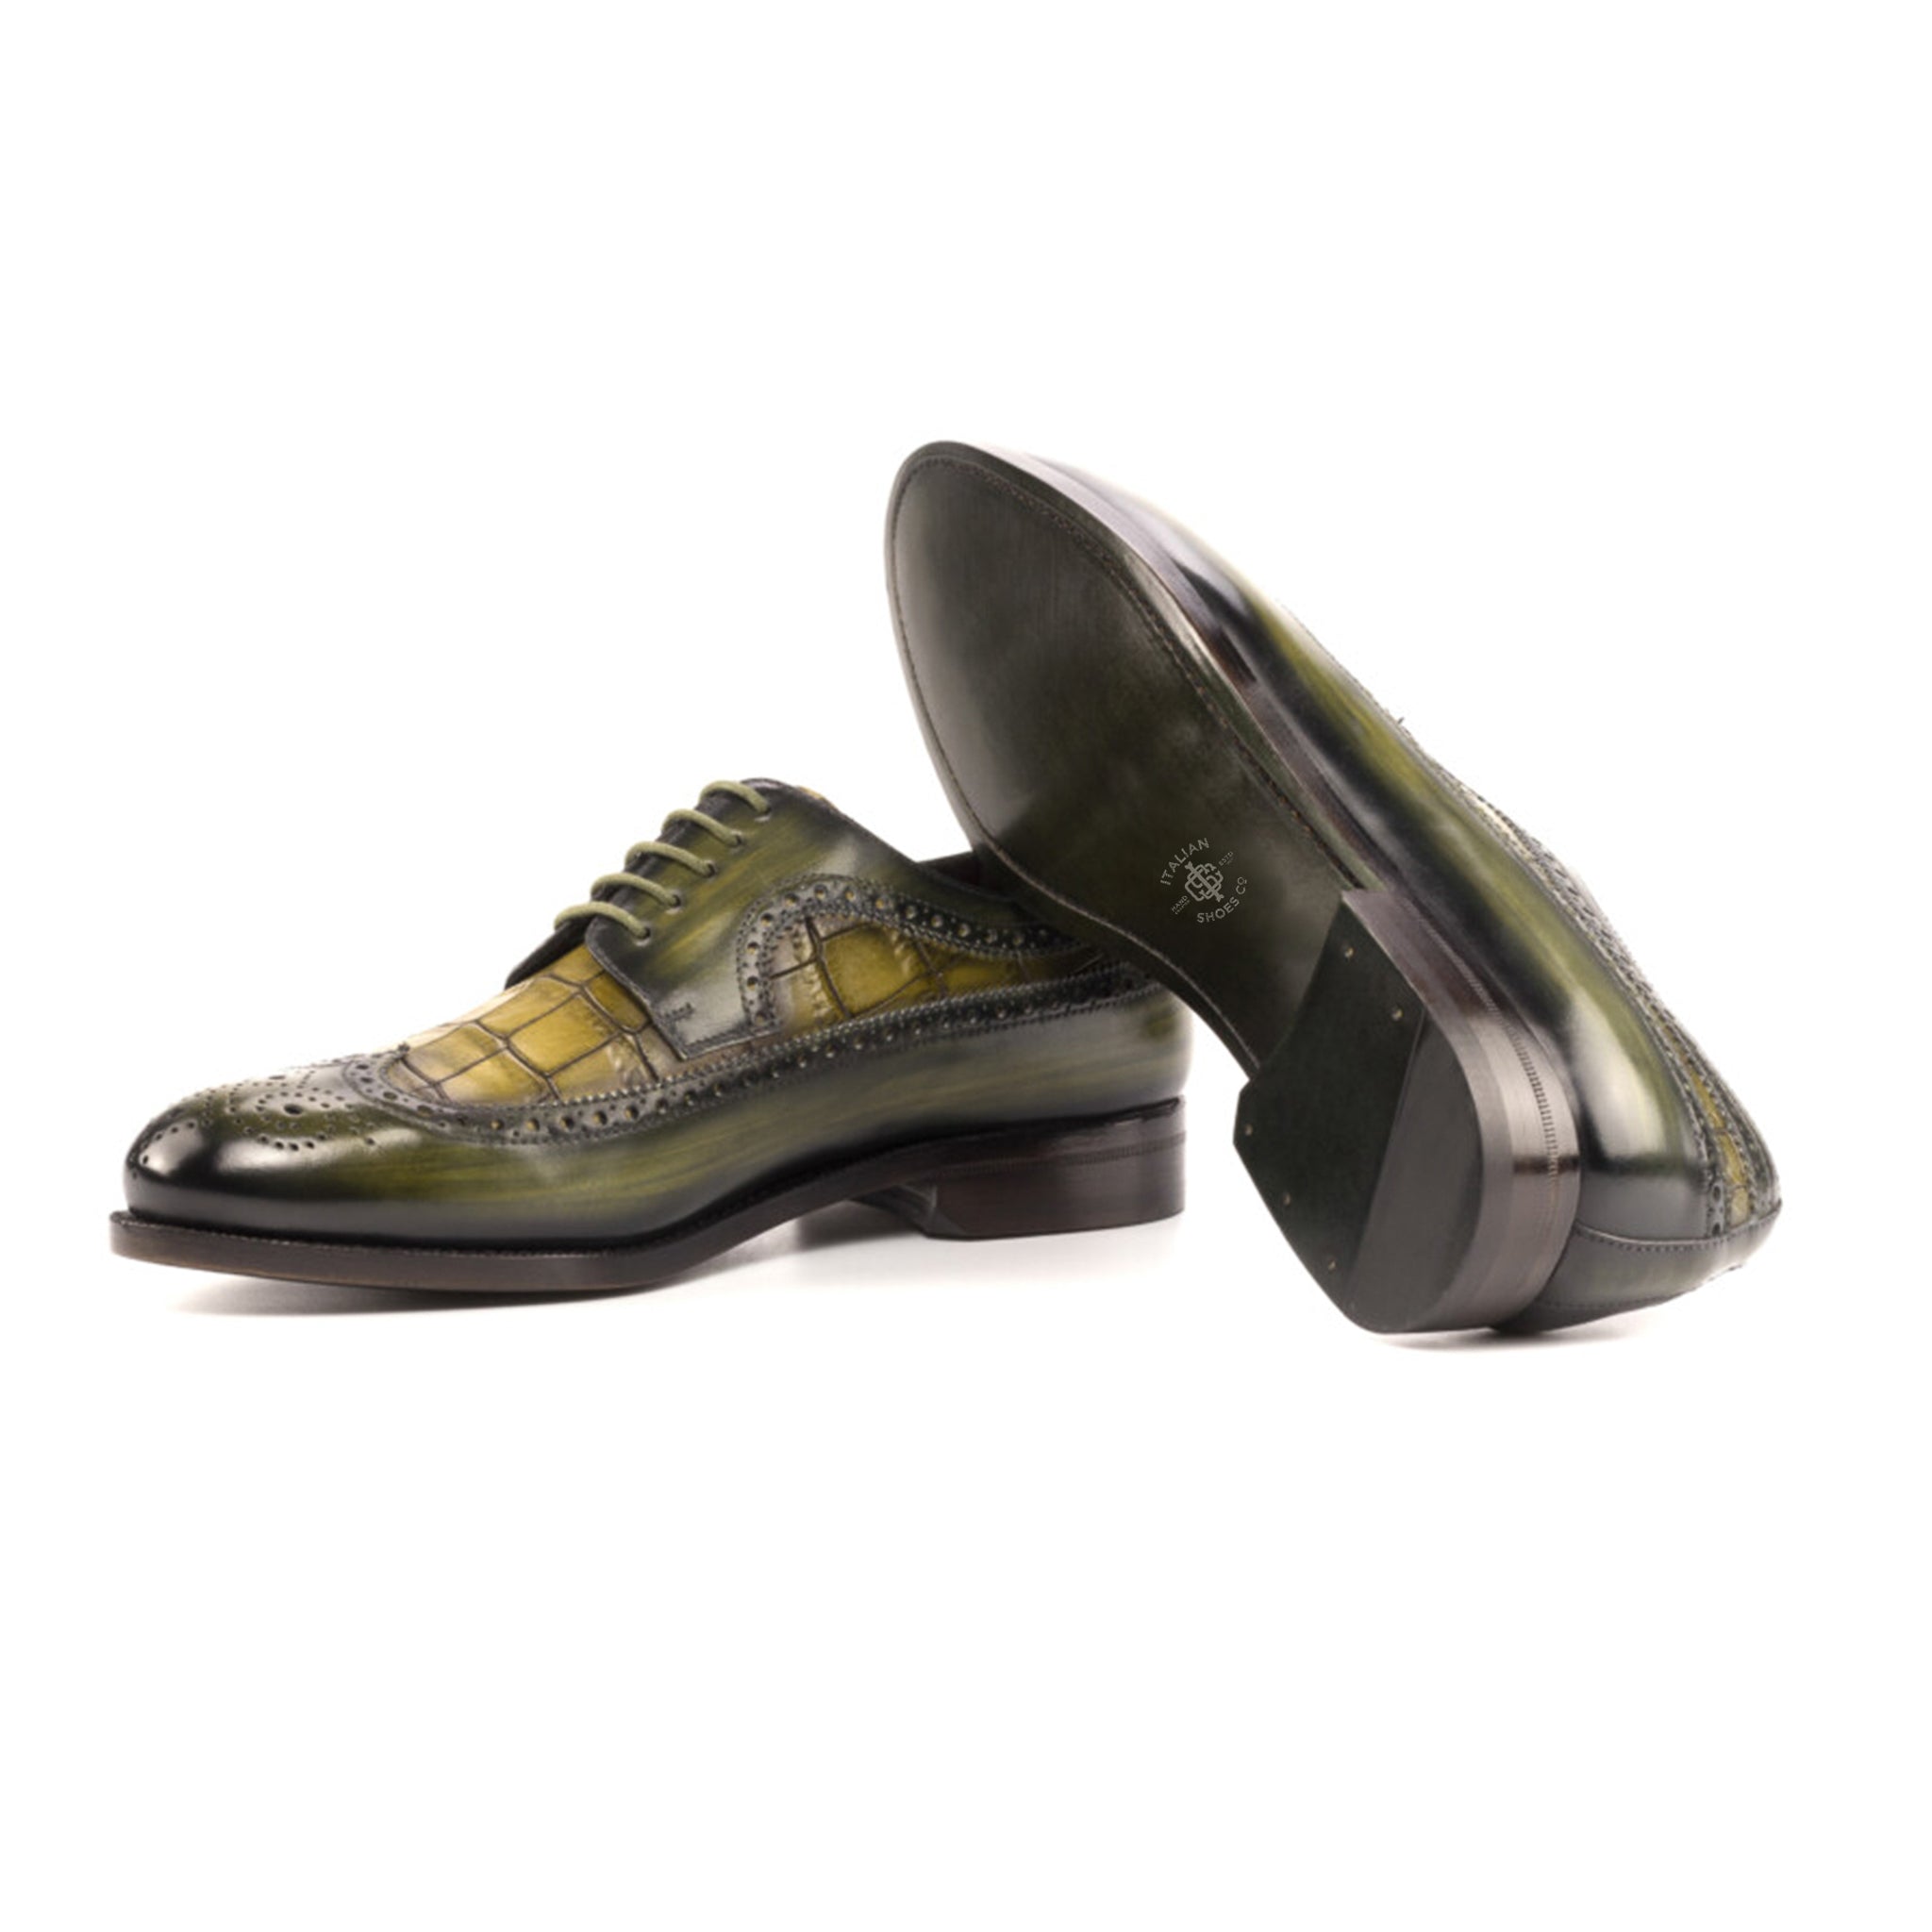 Green Patina Blucher Shoes with Croco